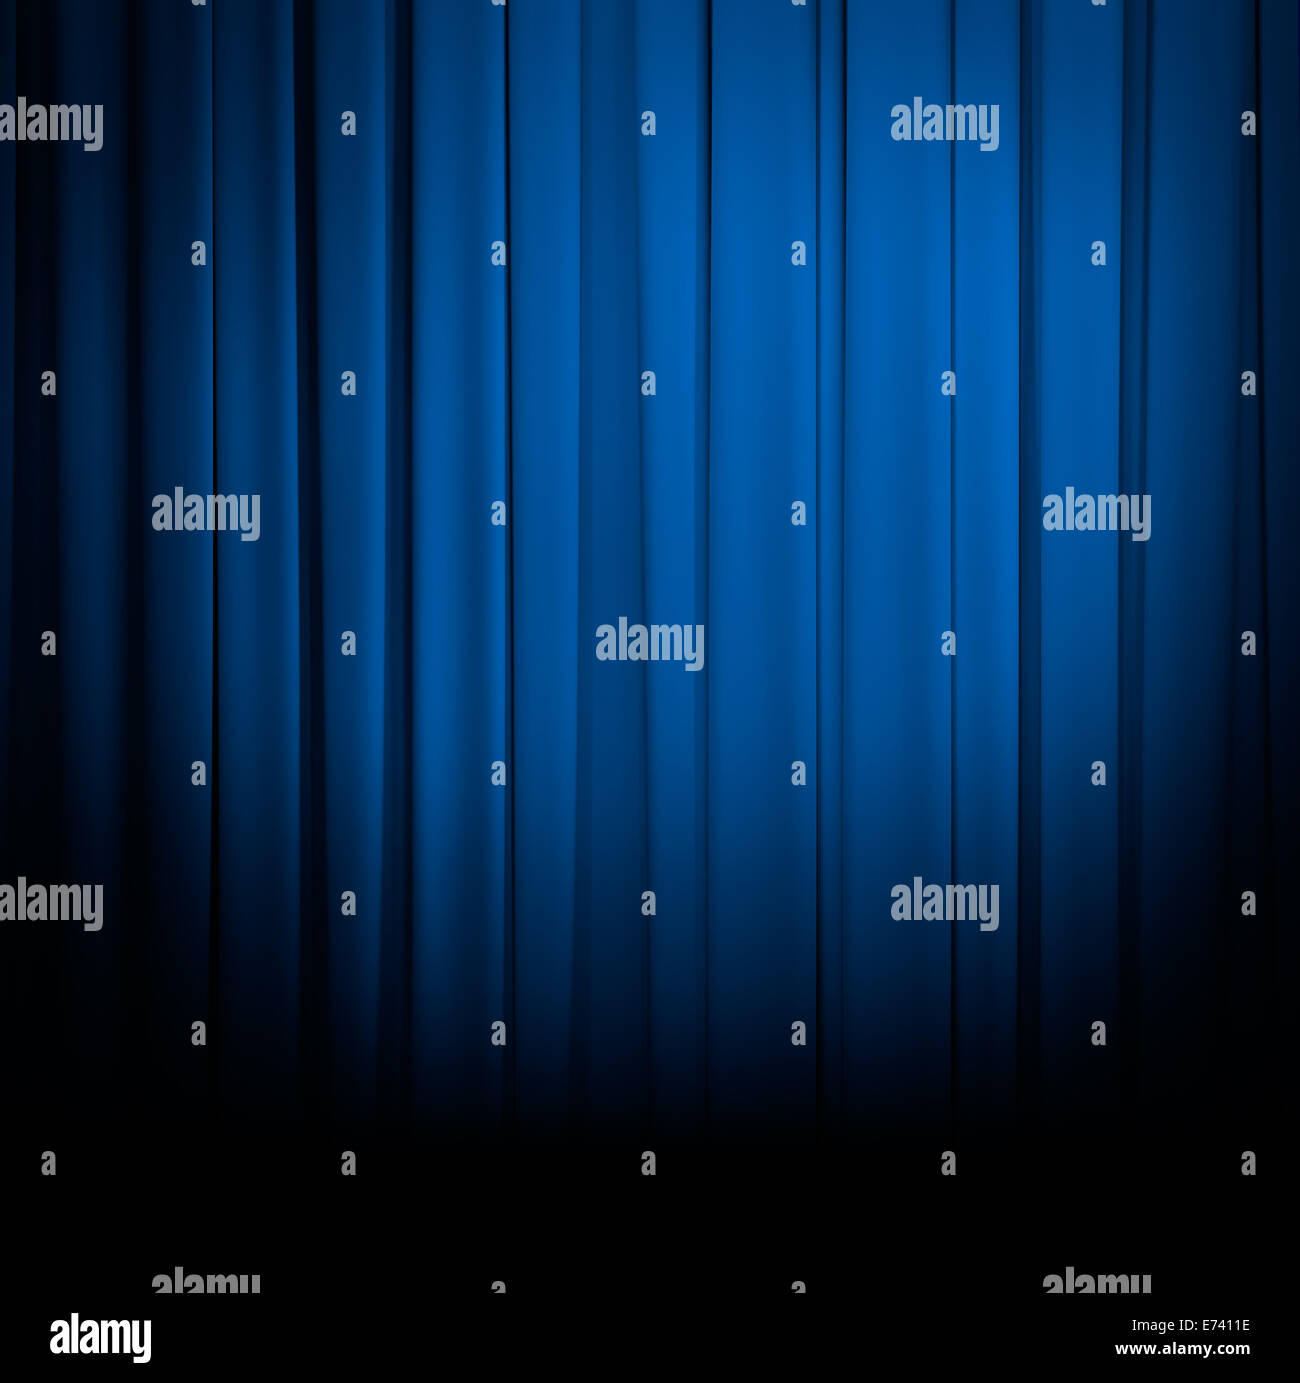 curtain or drapes blue background Stock Photo